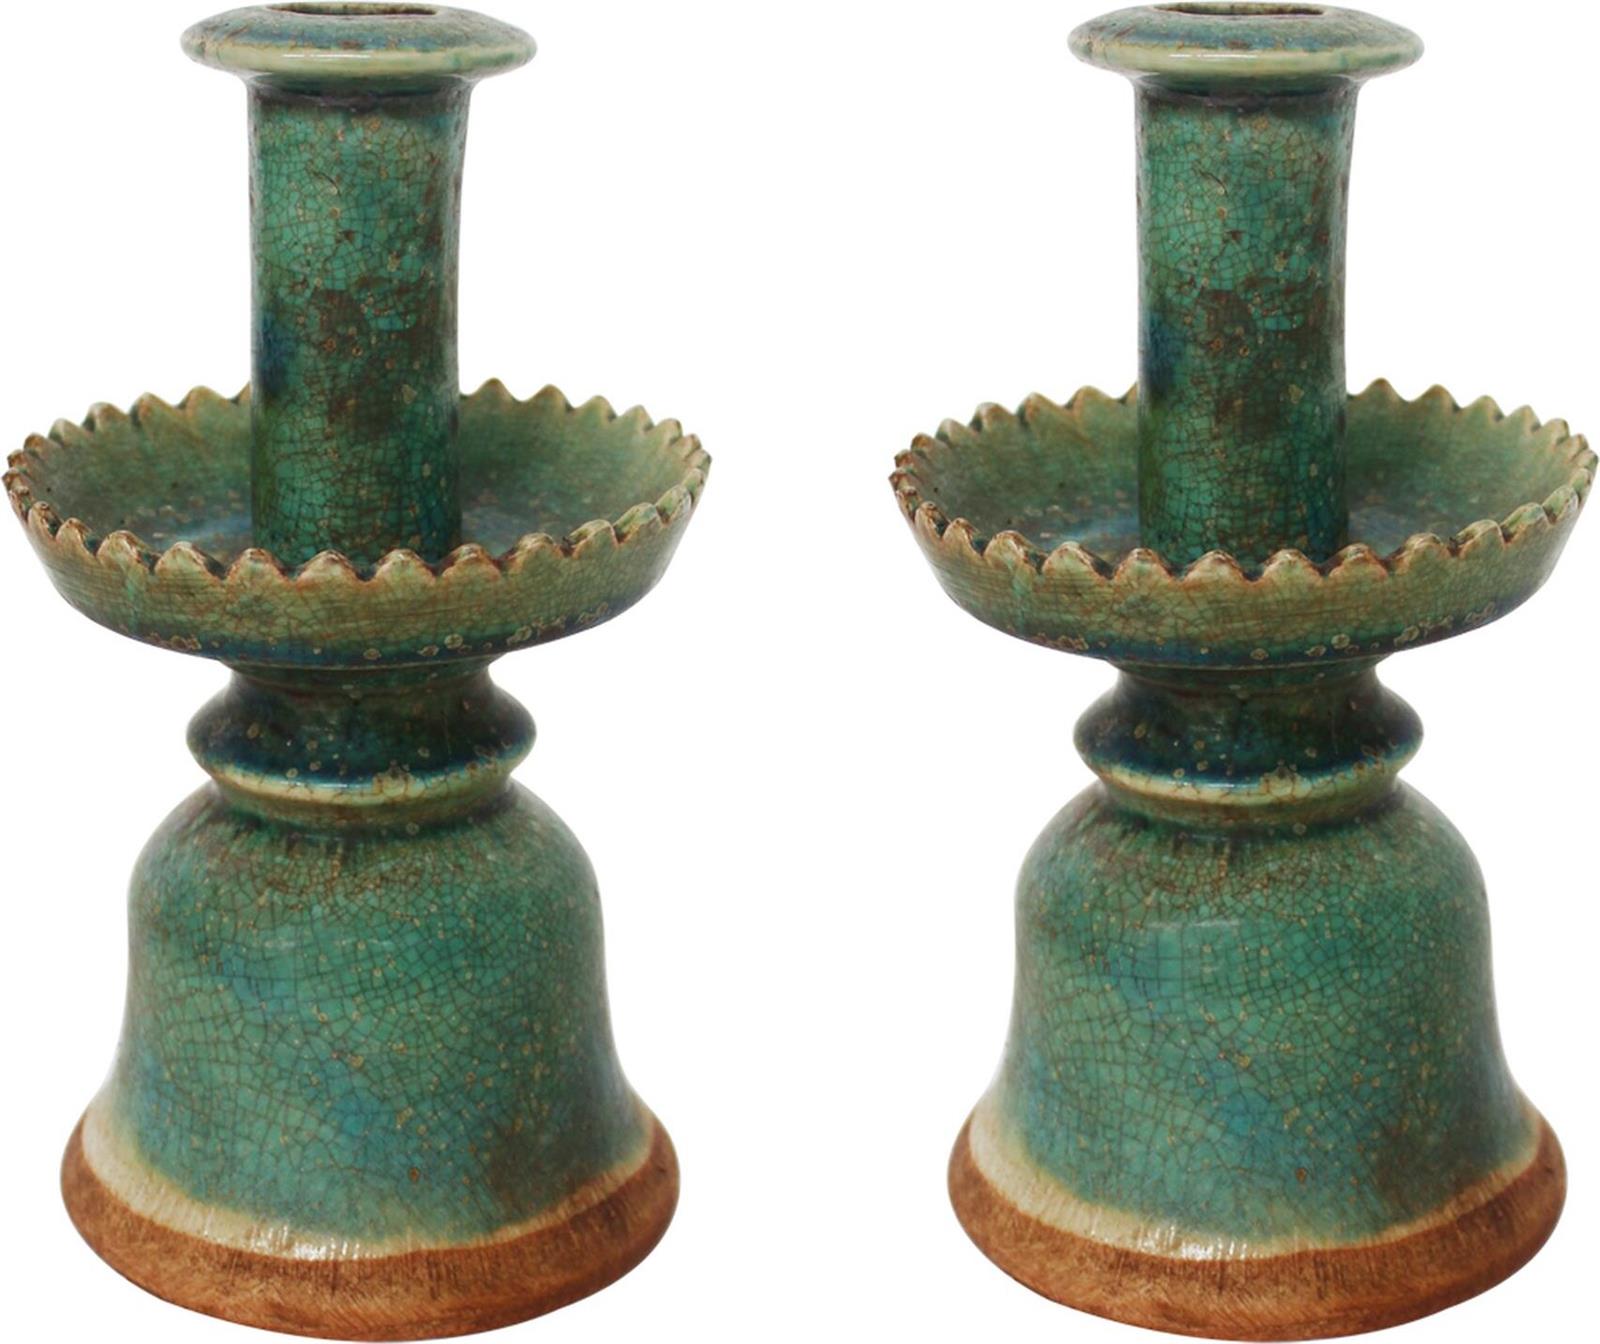 Candleholders Candleholder Candlestick Speckled Green Colors May Vary Variable-Image 1